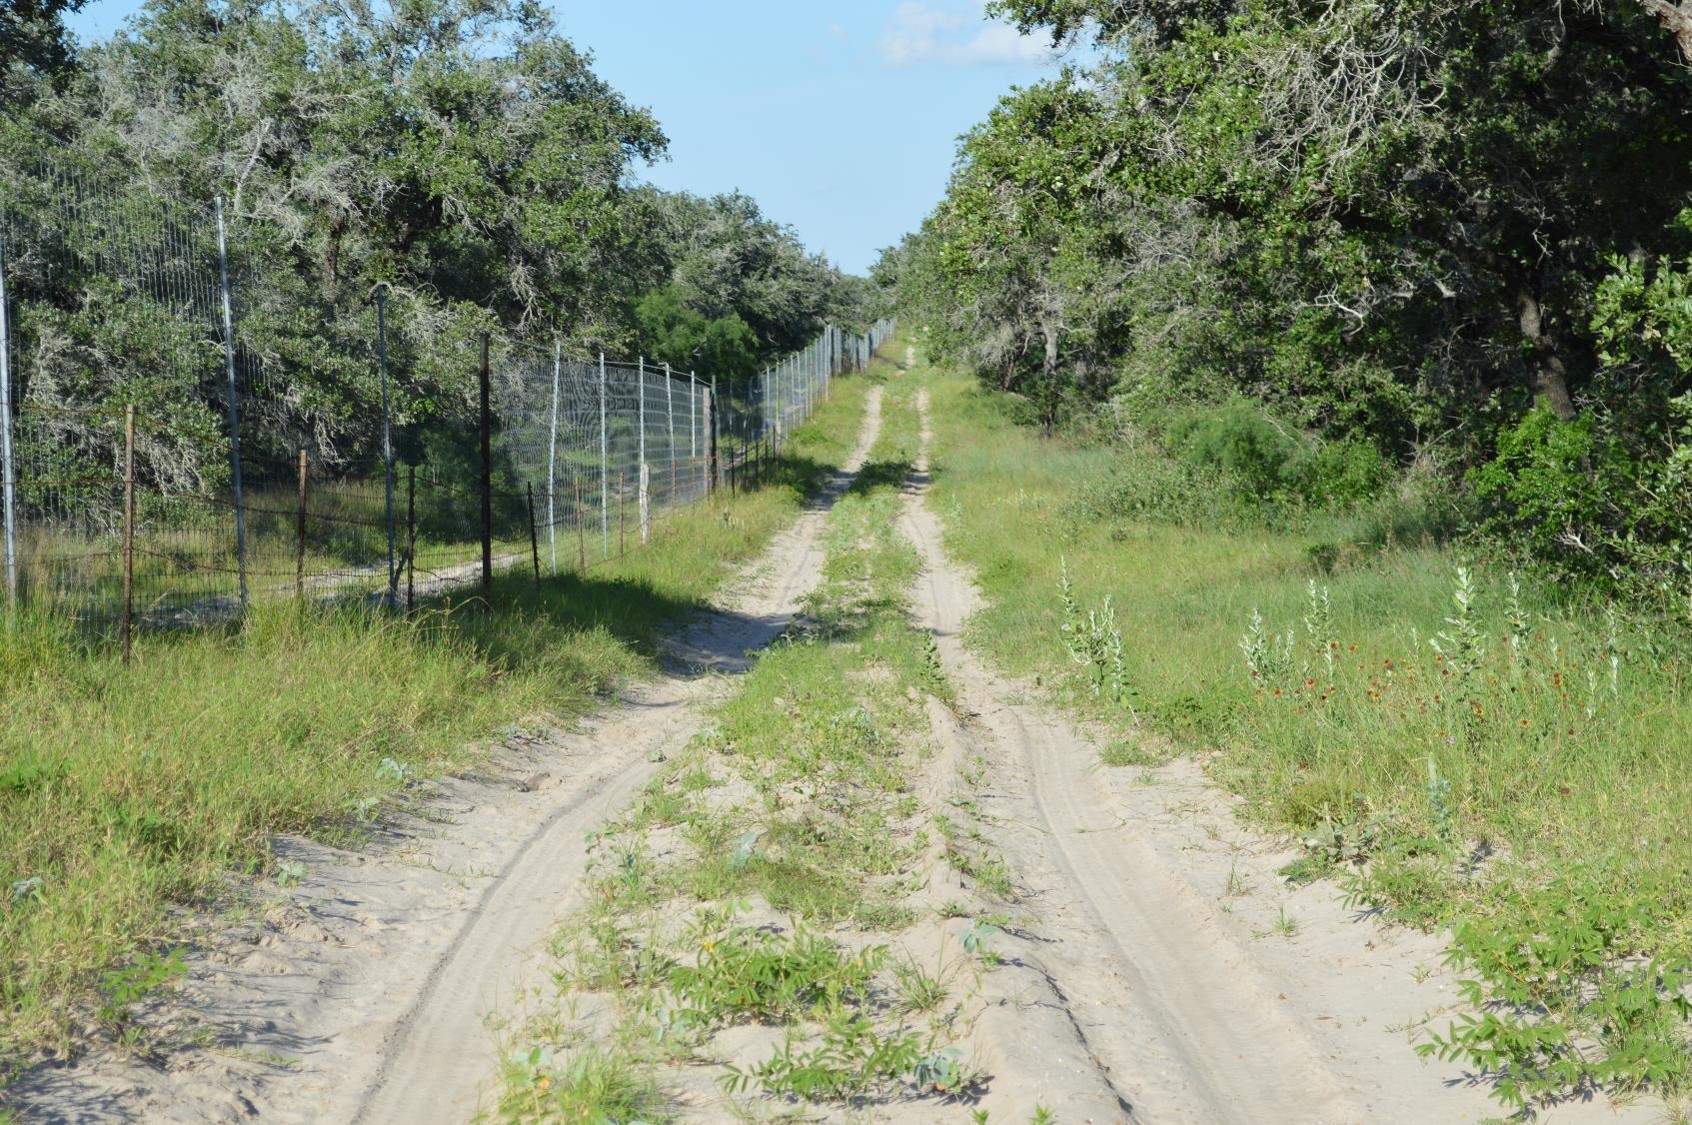 Dirt road in the brush with a wire fence on the left side and trees to the right